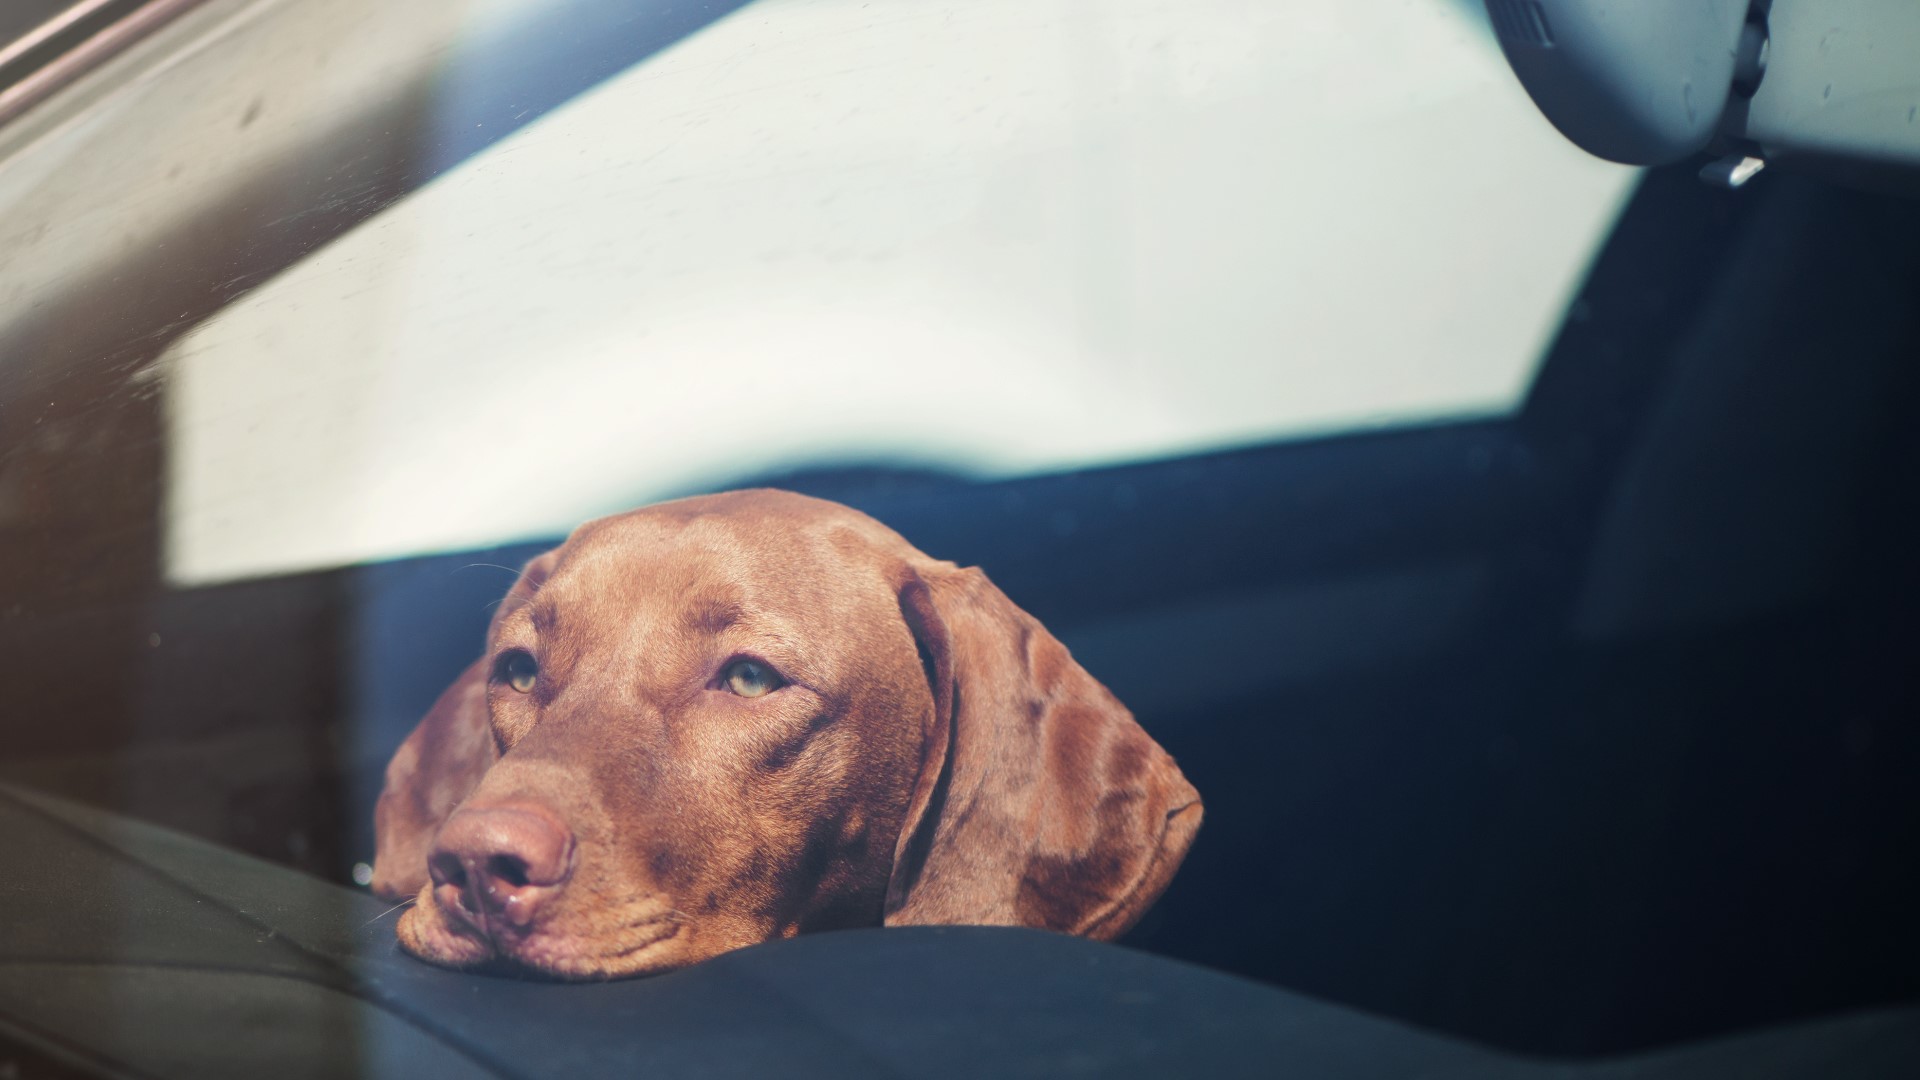 Louisville Metro Animal Services says dogs being left in hot cars happens too often.